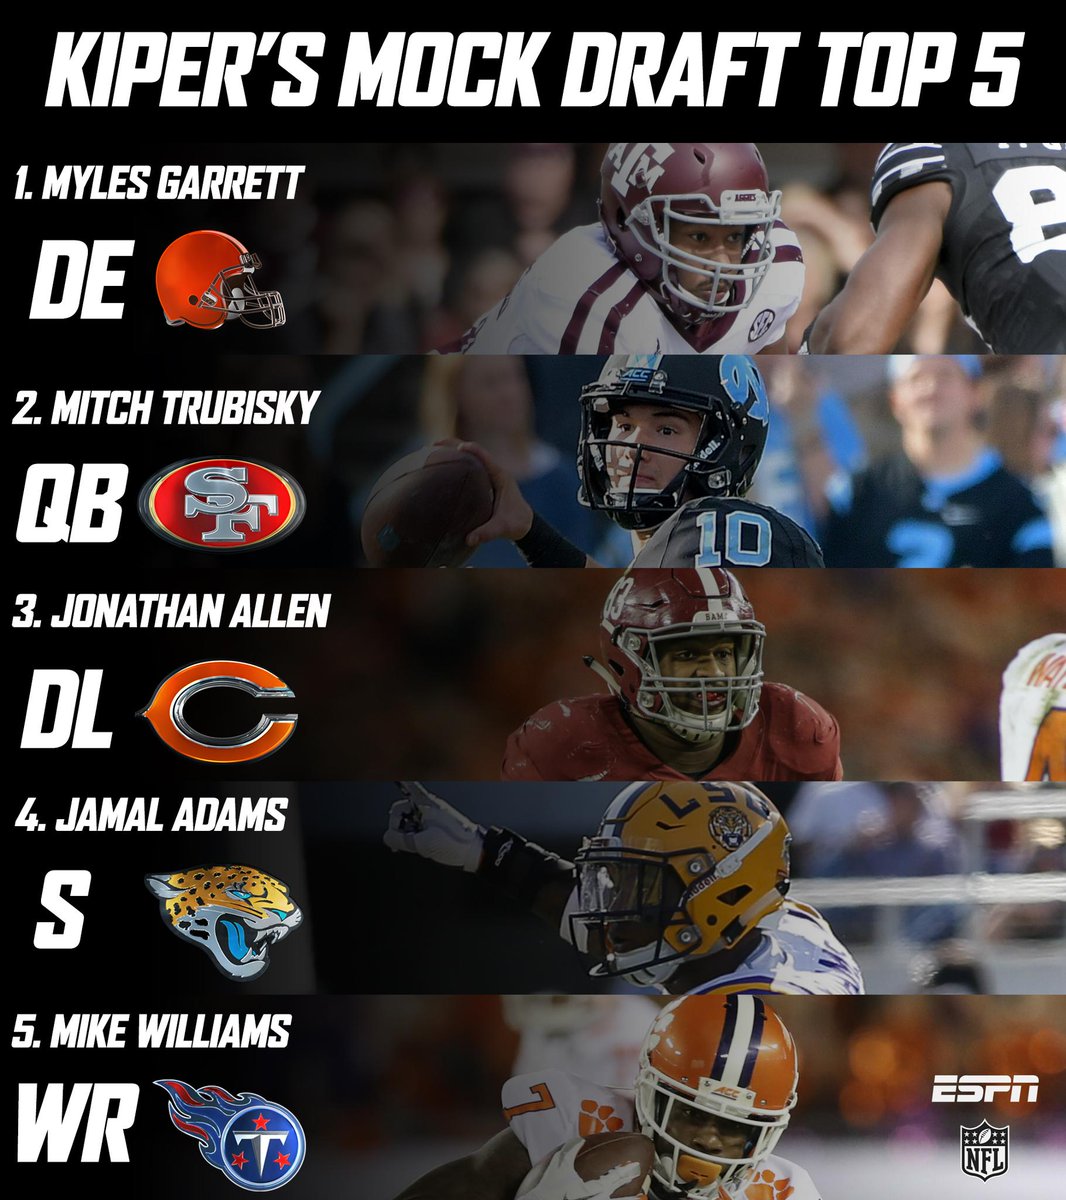 Here are the top 5 picks from Mel Kiper Jr.'s first NFL Mock Draft